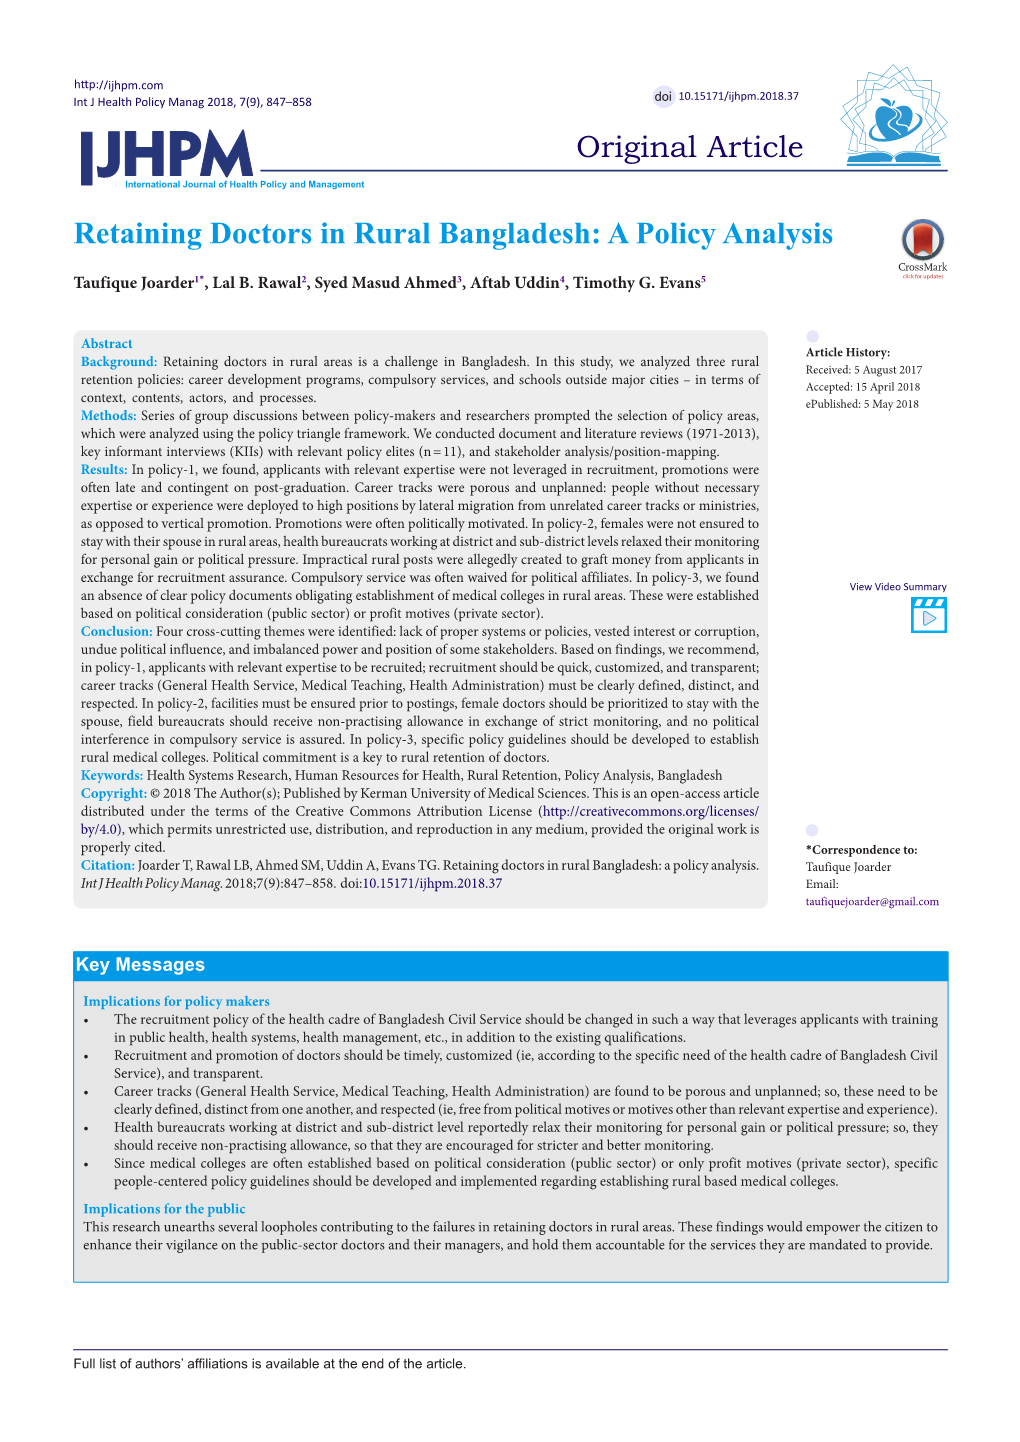 Retaining Doctors in Rural Bangladesh: a Policy Analysis